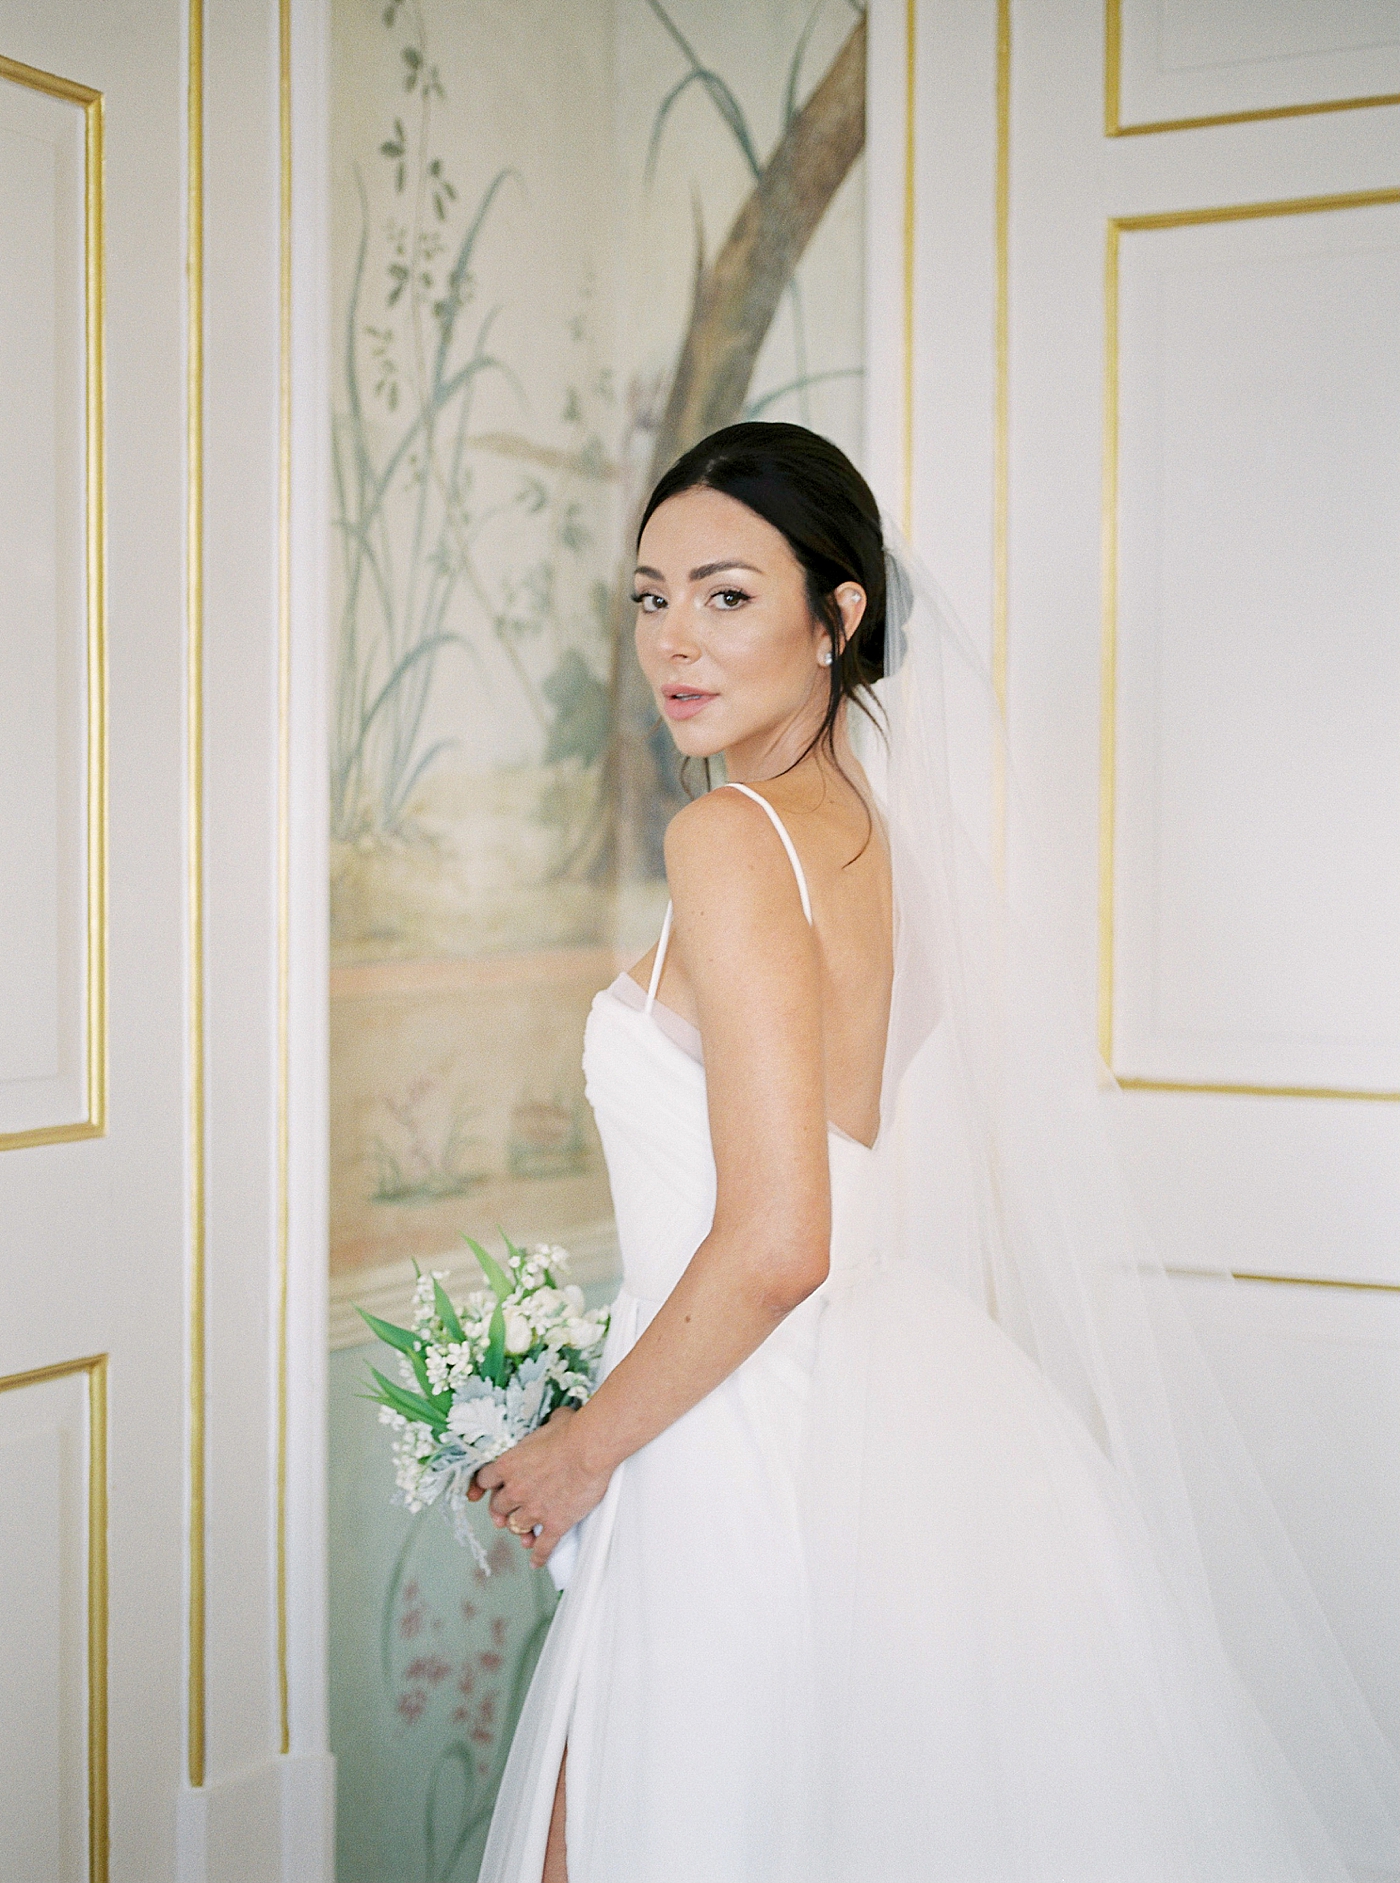 Portrait of a bride in a room with wallpaper | Image by Diane Sotero Photography